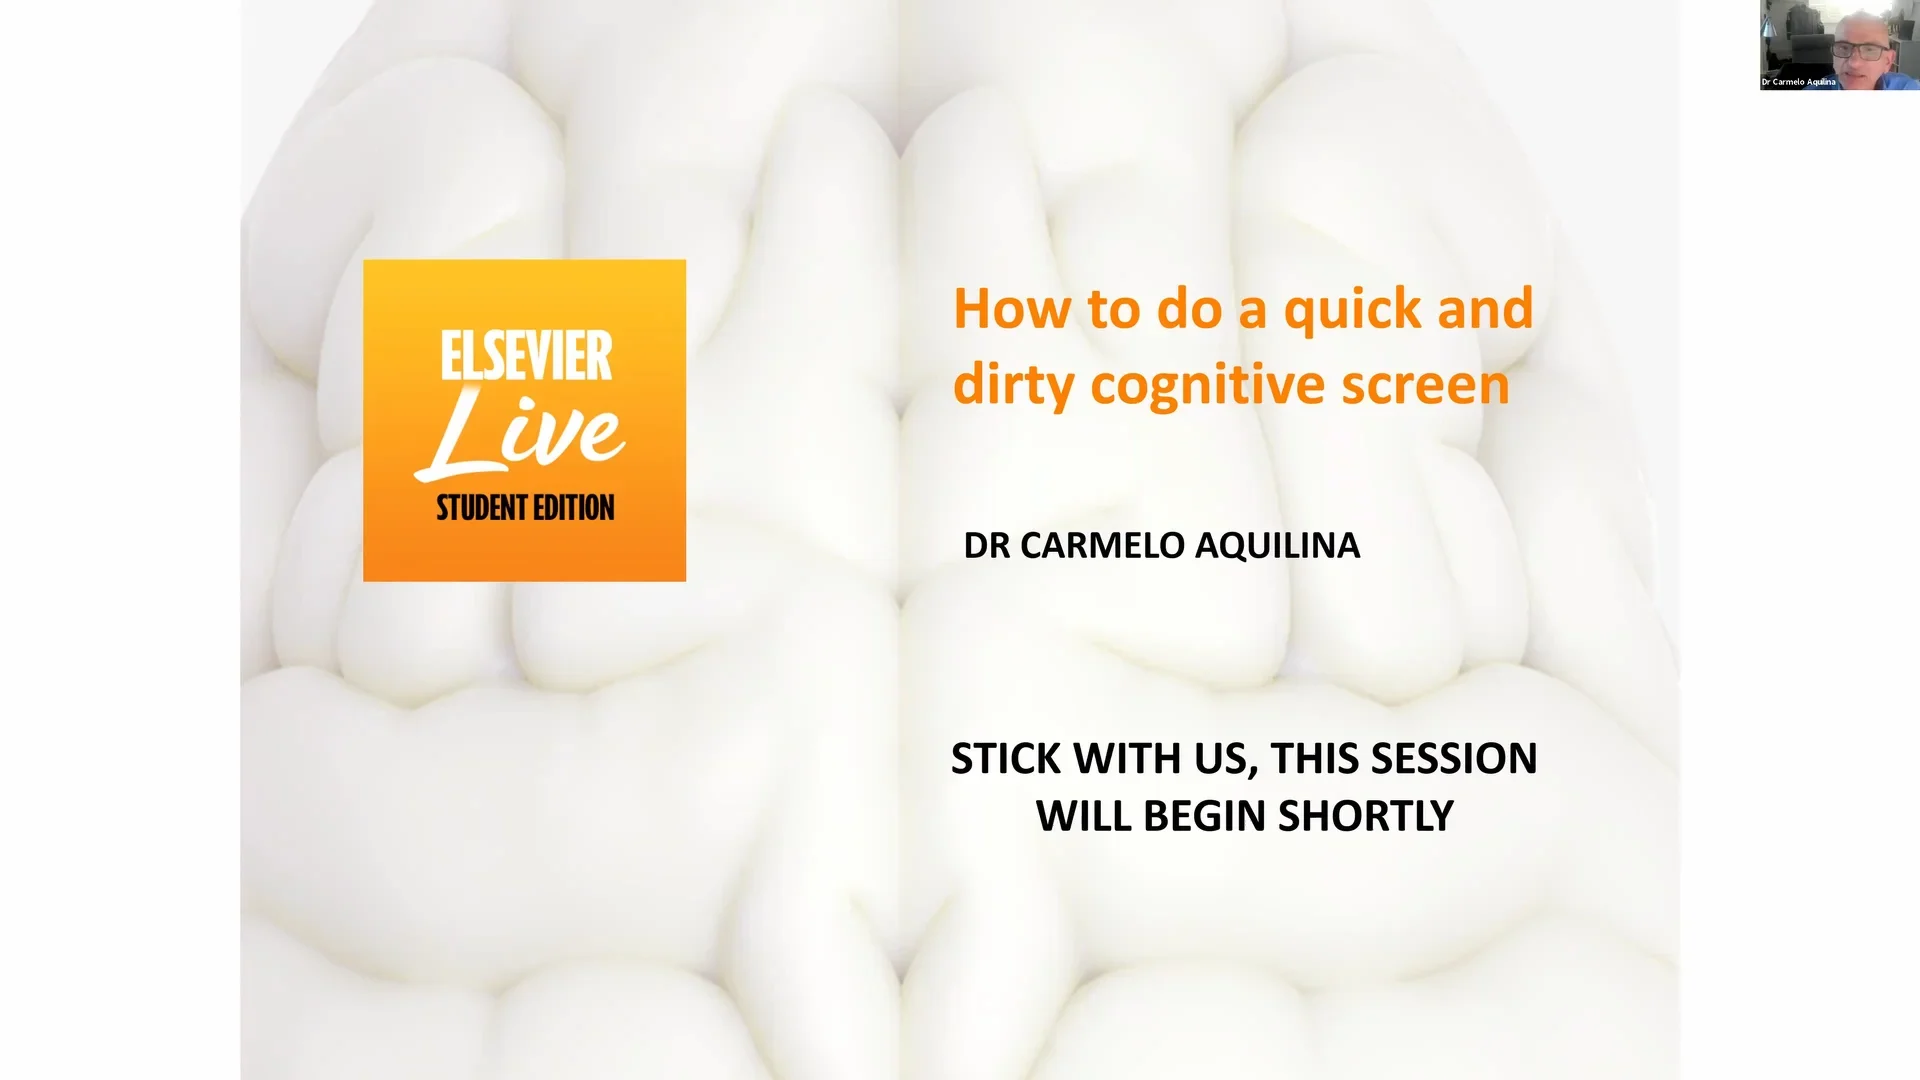 How to do a quick and dirty cognitive screen